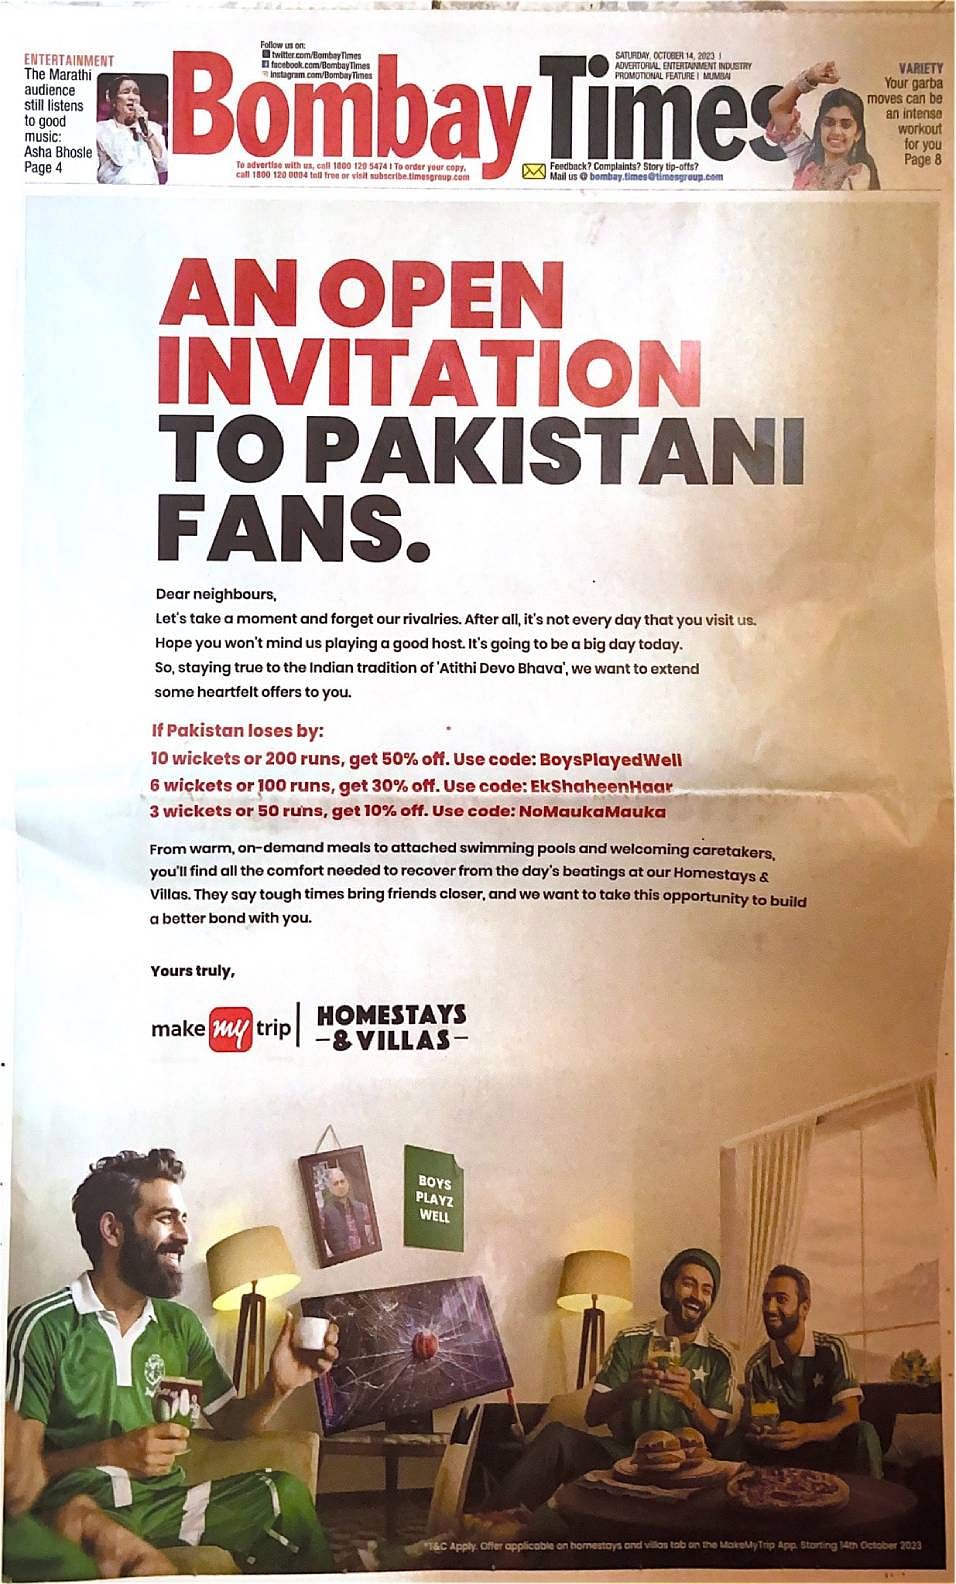 Brands trickle in to cheer for India ahead of the World Cup match against Pakistan